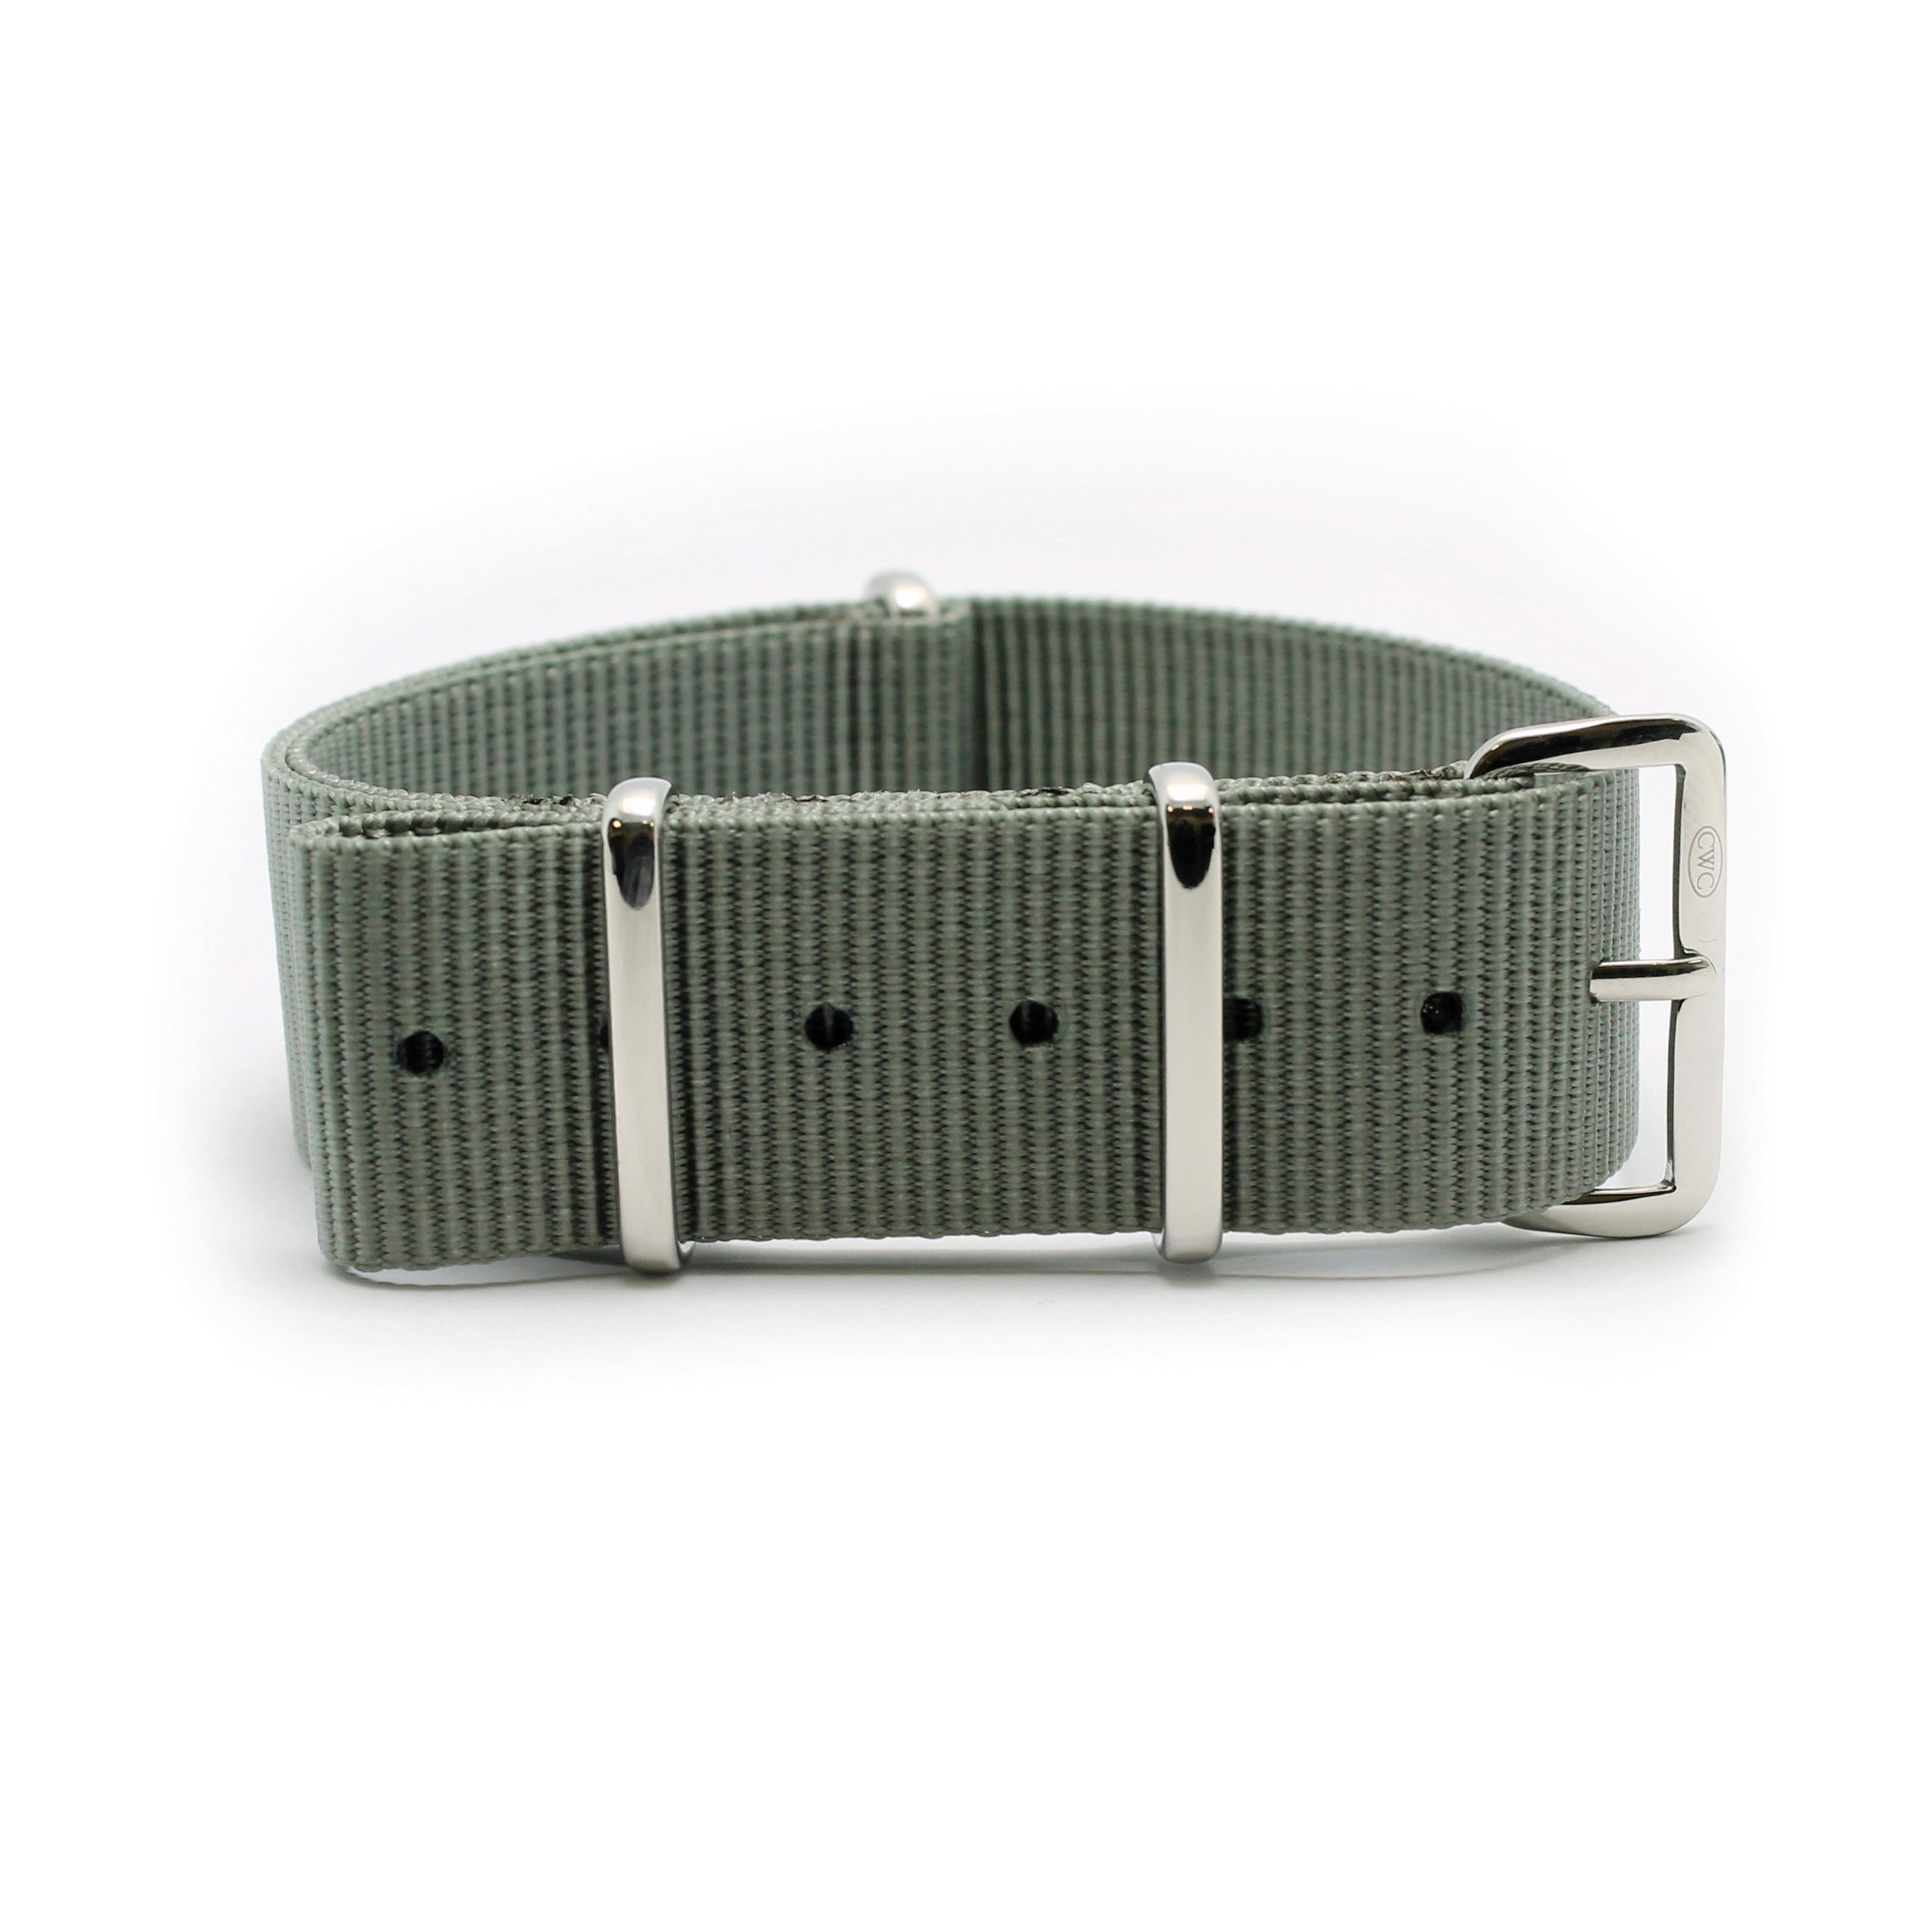 CABOT MILITARY WATCH STRAP - VINTAGE GREY WITH GLOSS SILVER BUCKLE